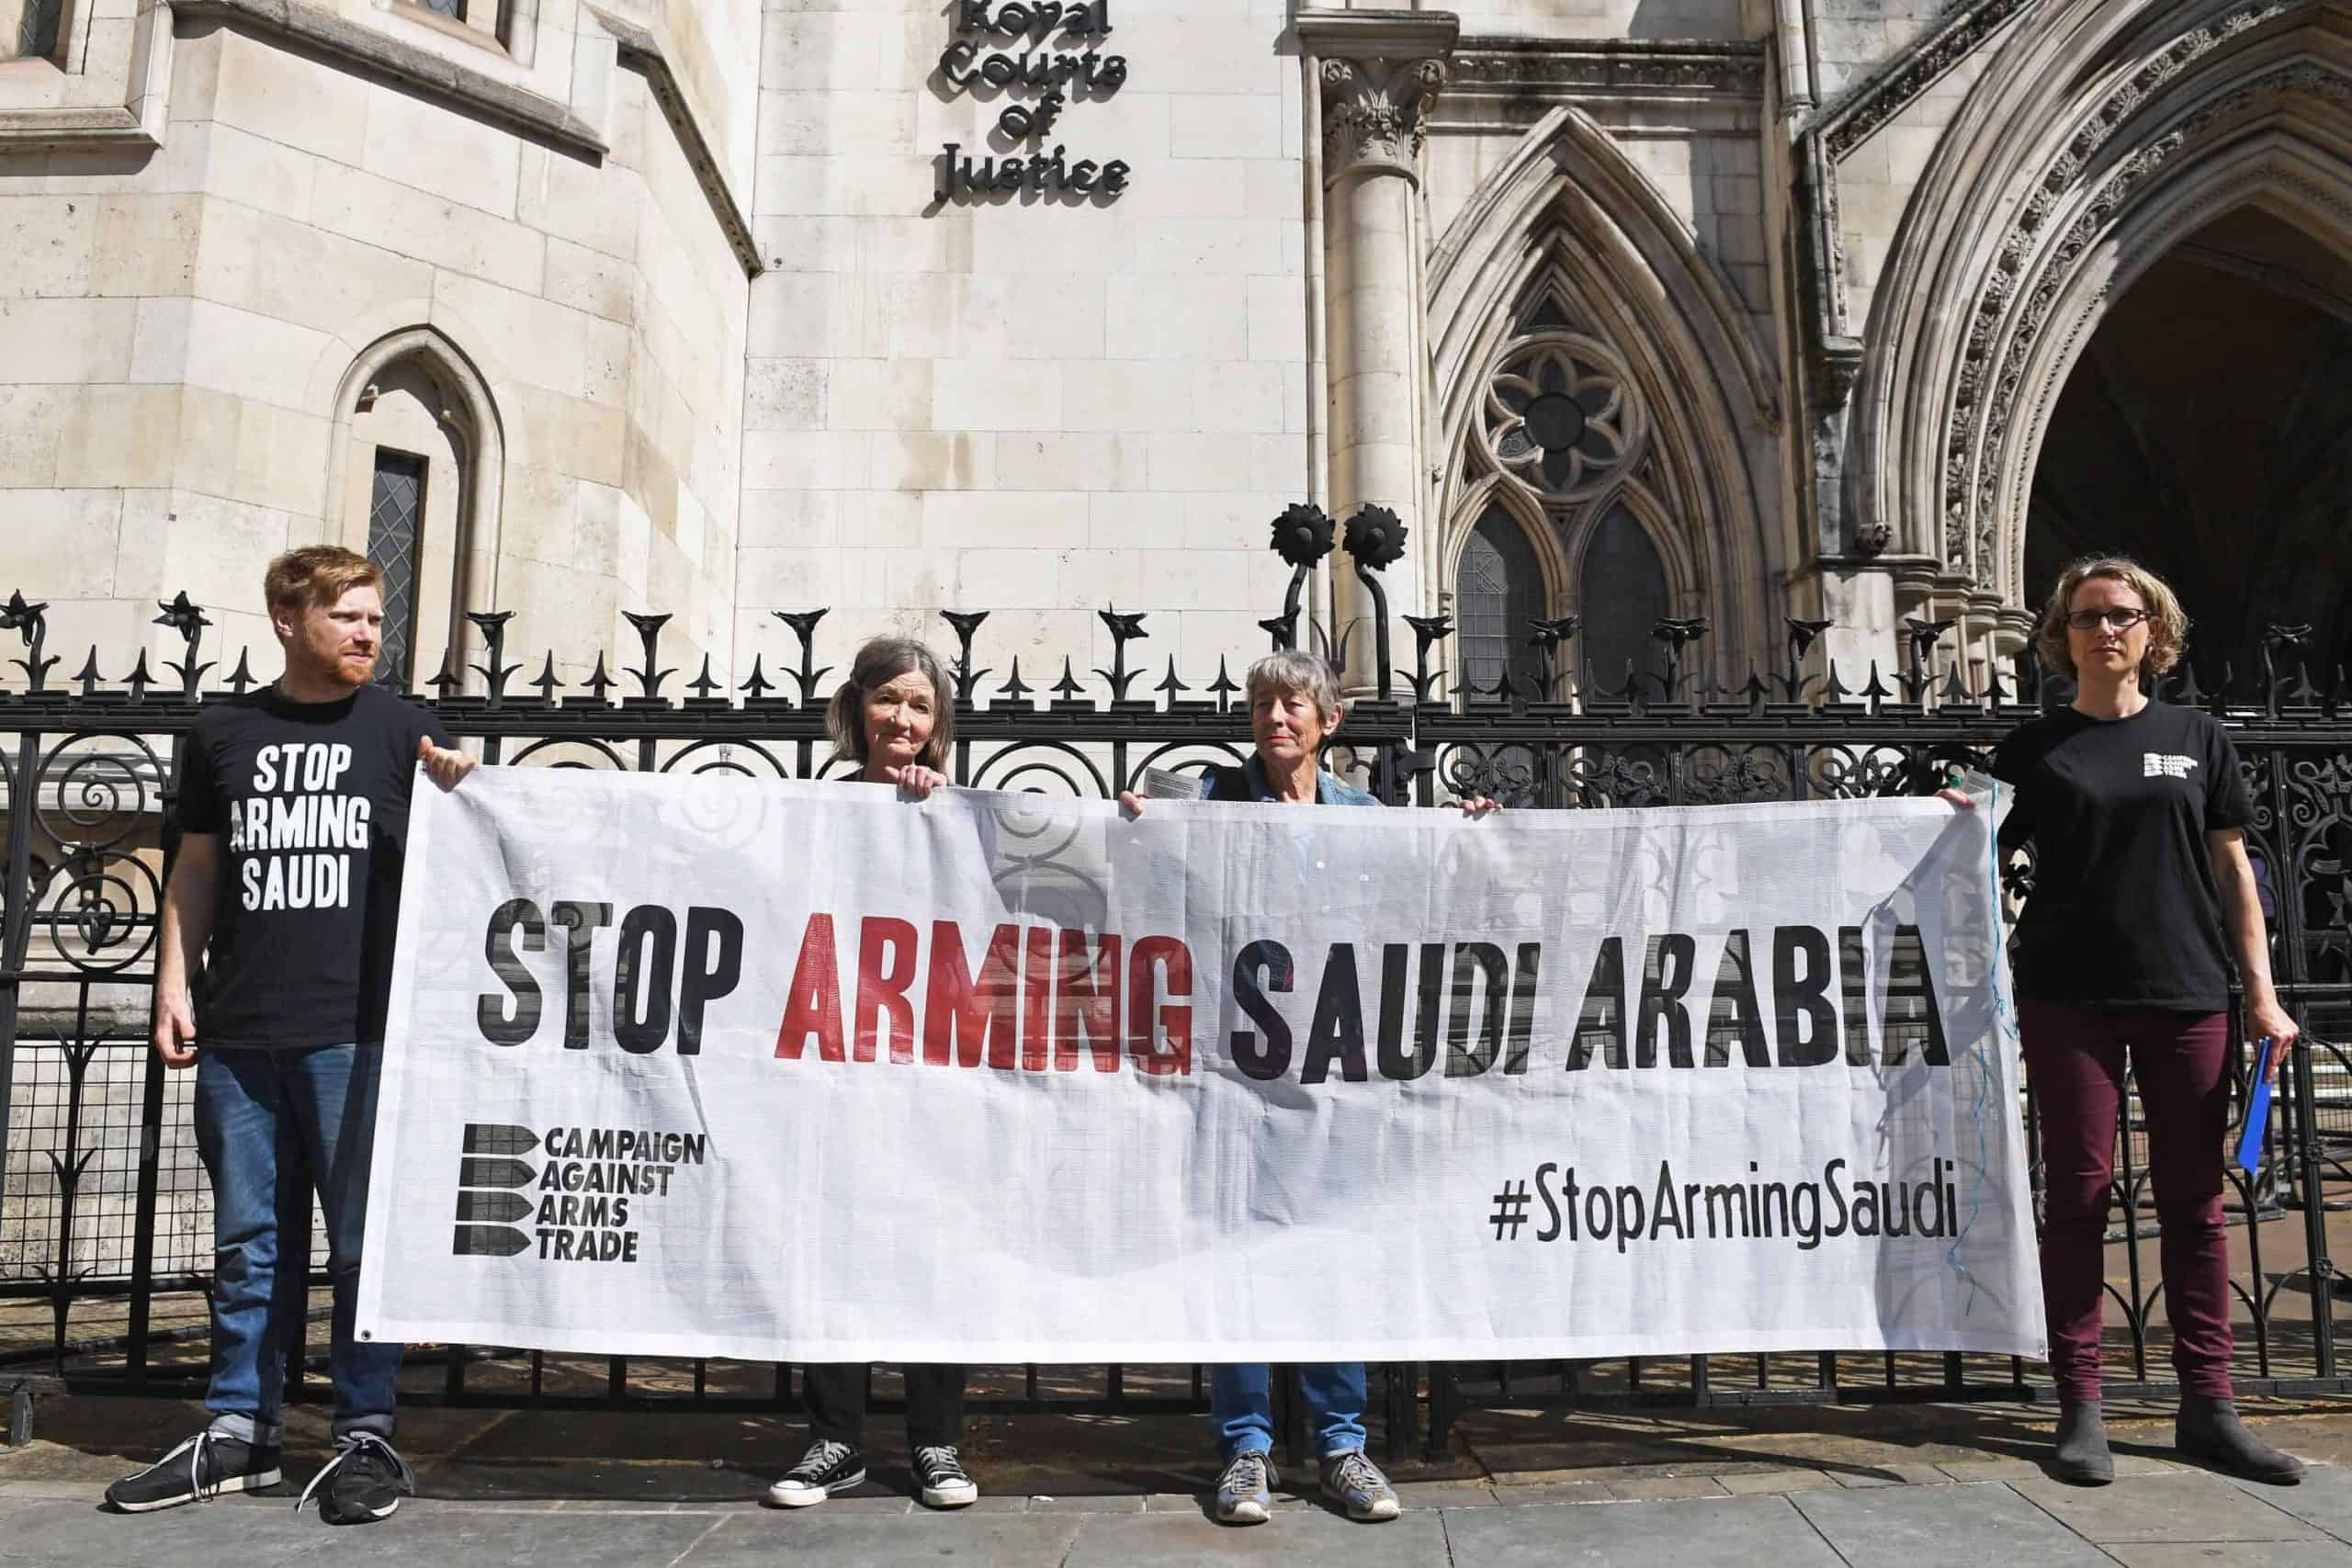 Government apologises for ‘inadvertent’ arms sales to Saudi Arabia